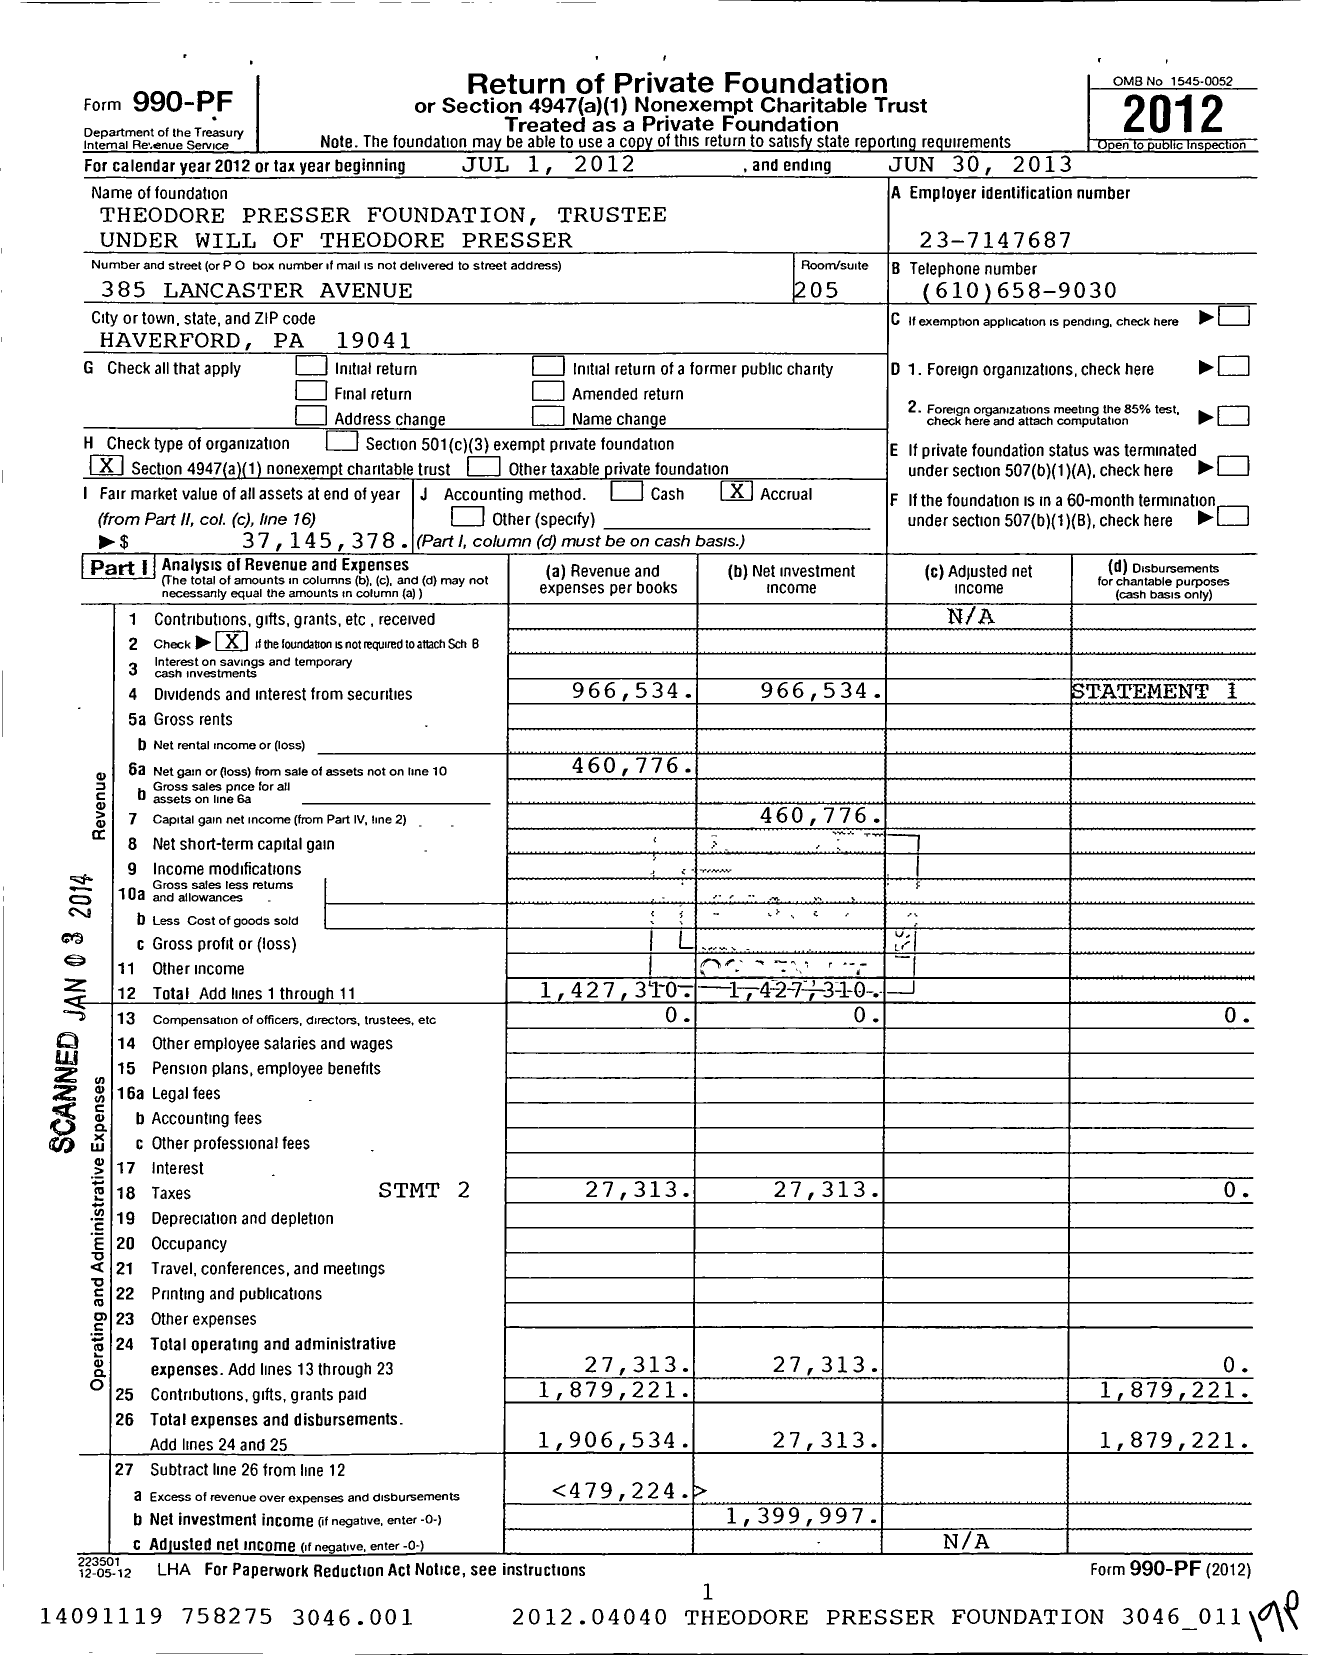 Image of first page of 2012 Form 990PF for Theodore Presser Foundation Trustee Under Will of Theodore Presser